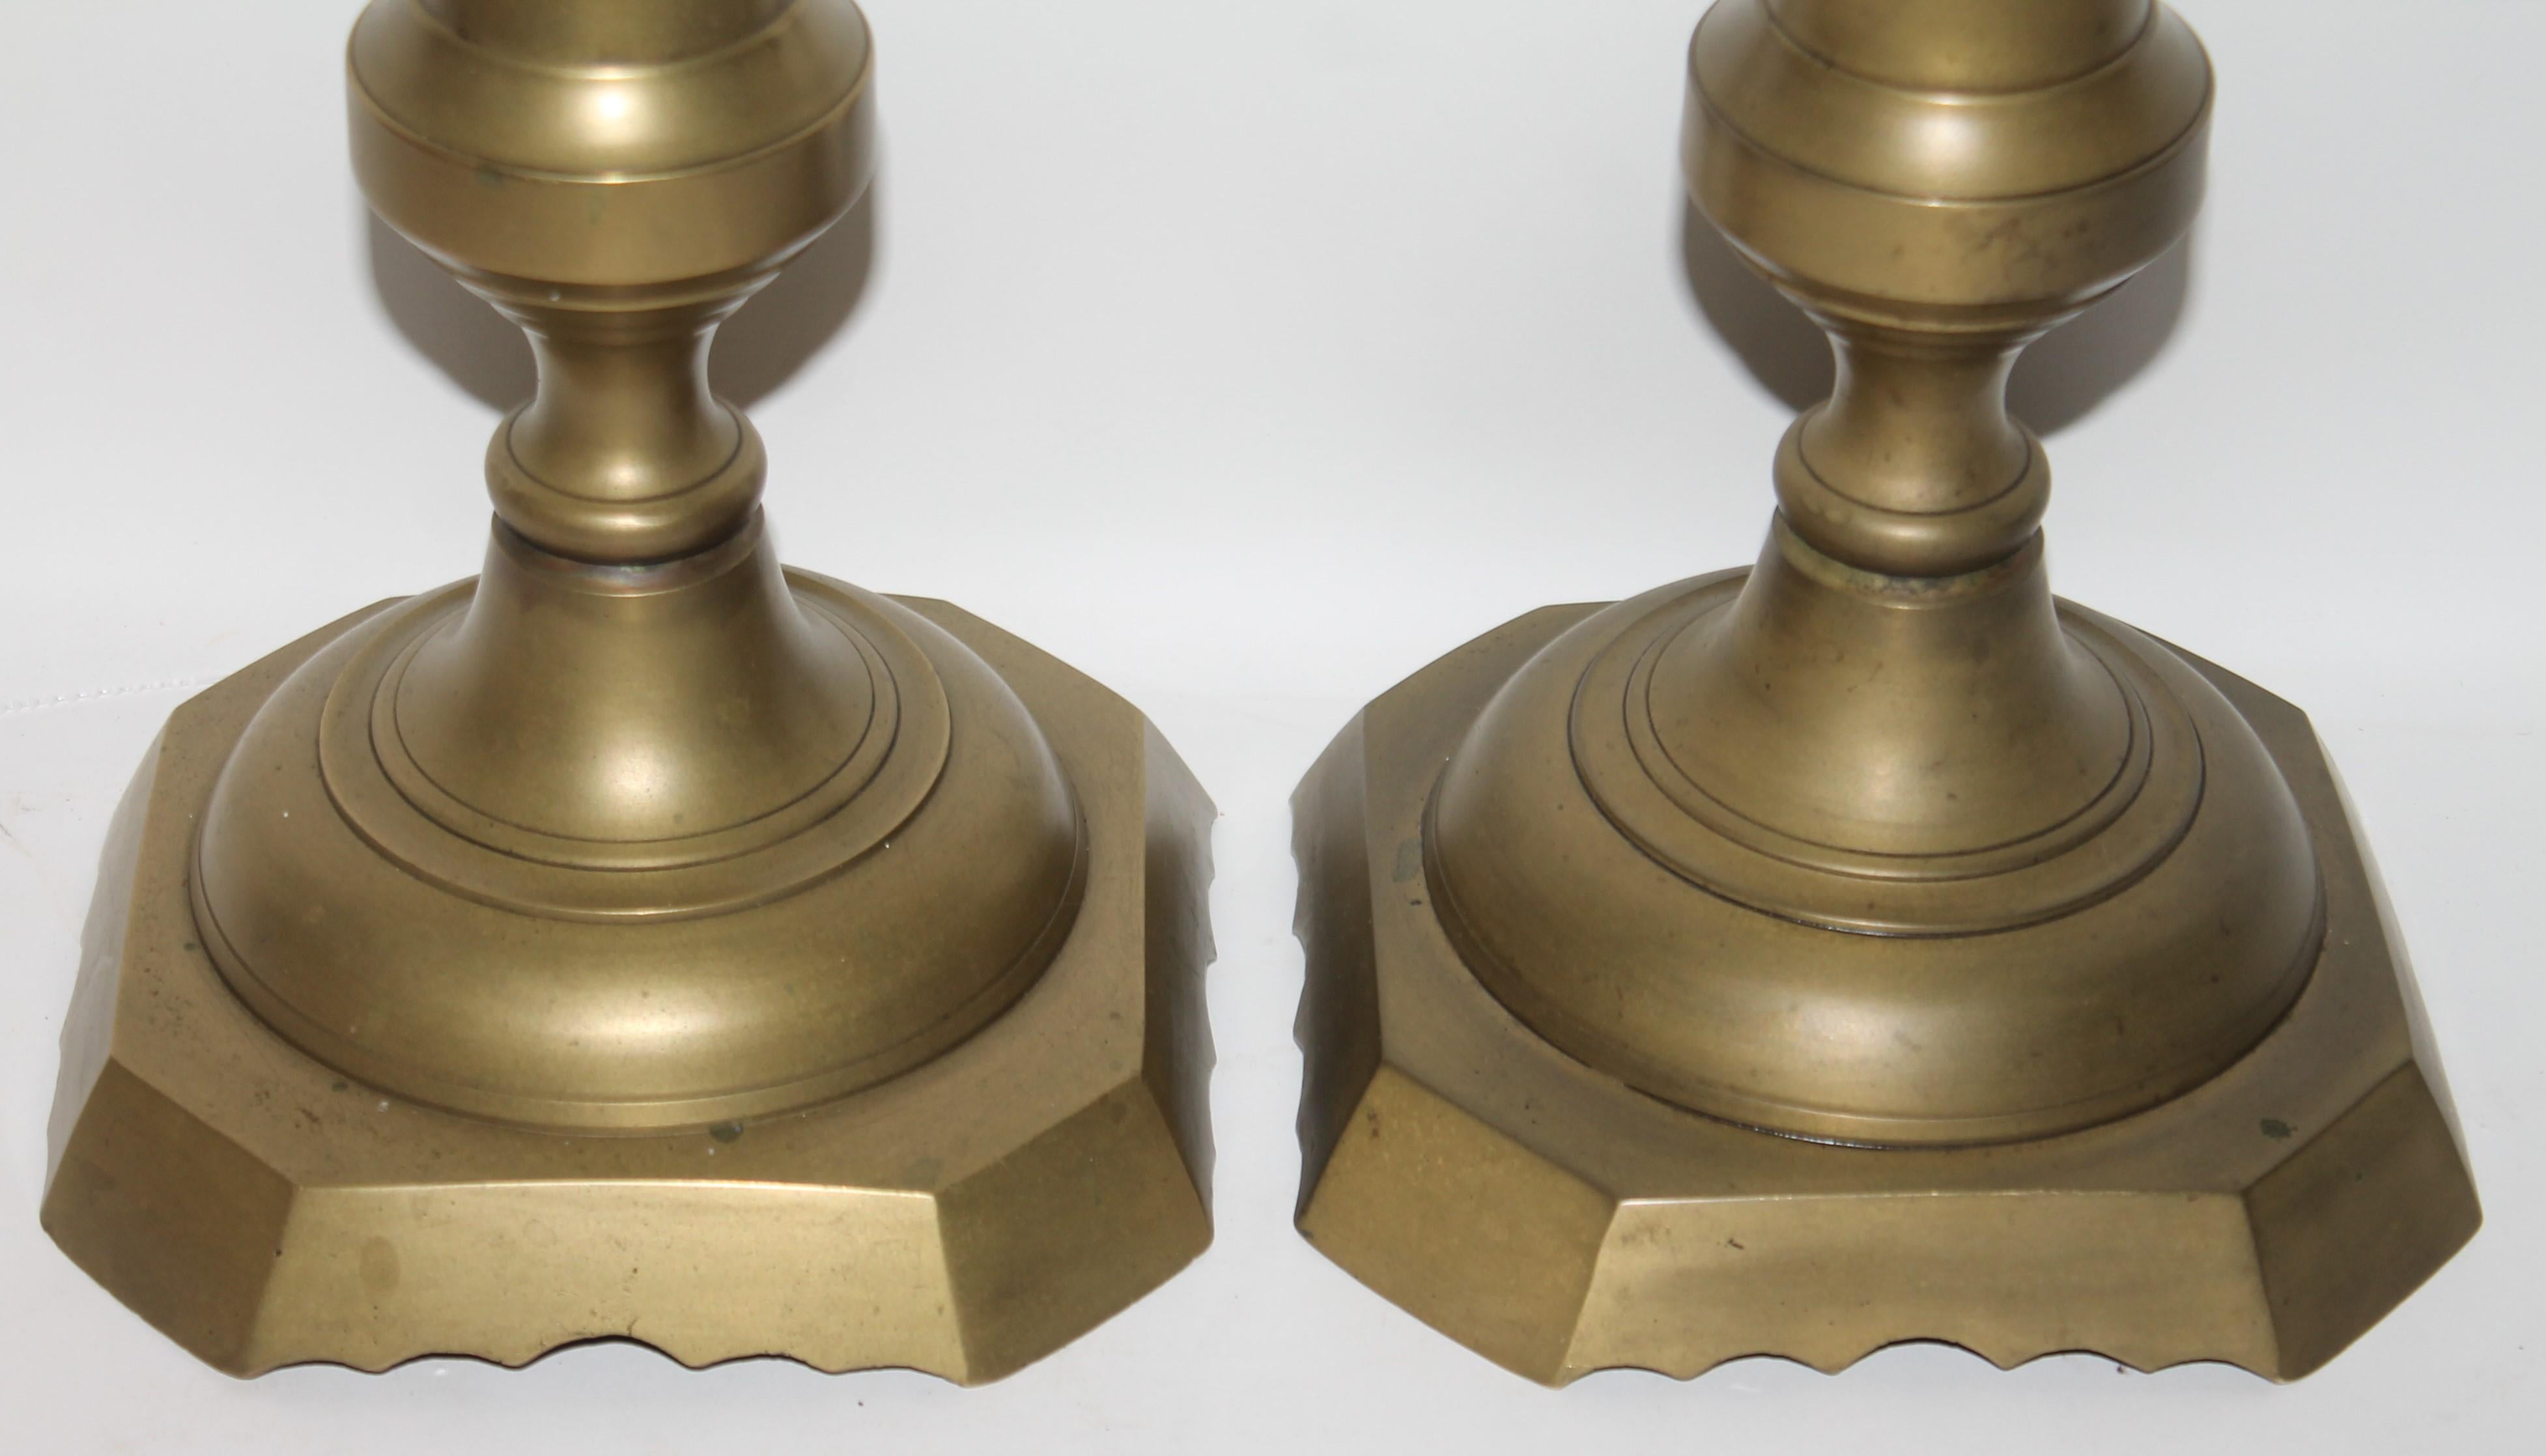 American Colonial Monumental 19th Century Brass Candlestick Holders, Pair